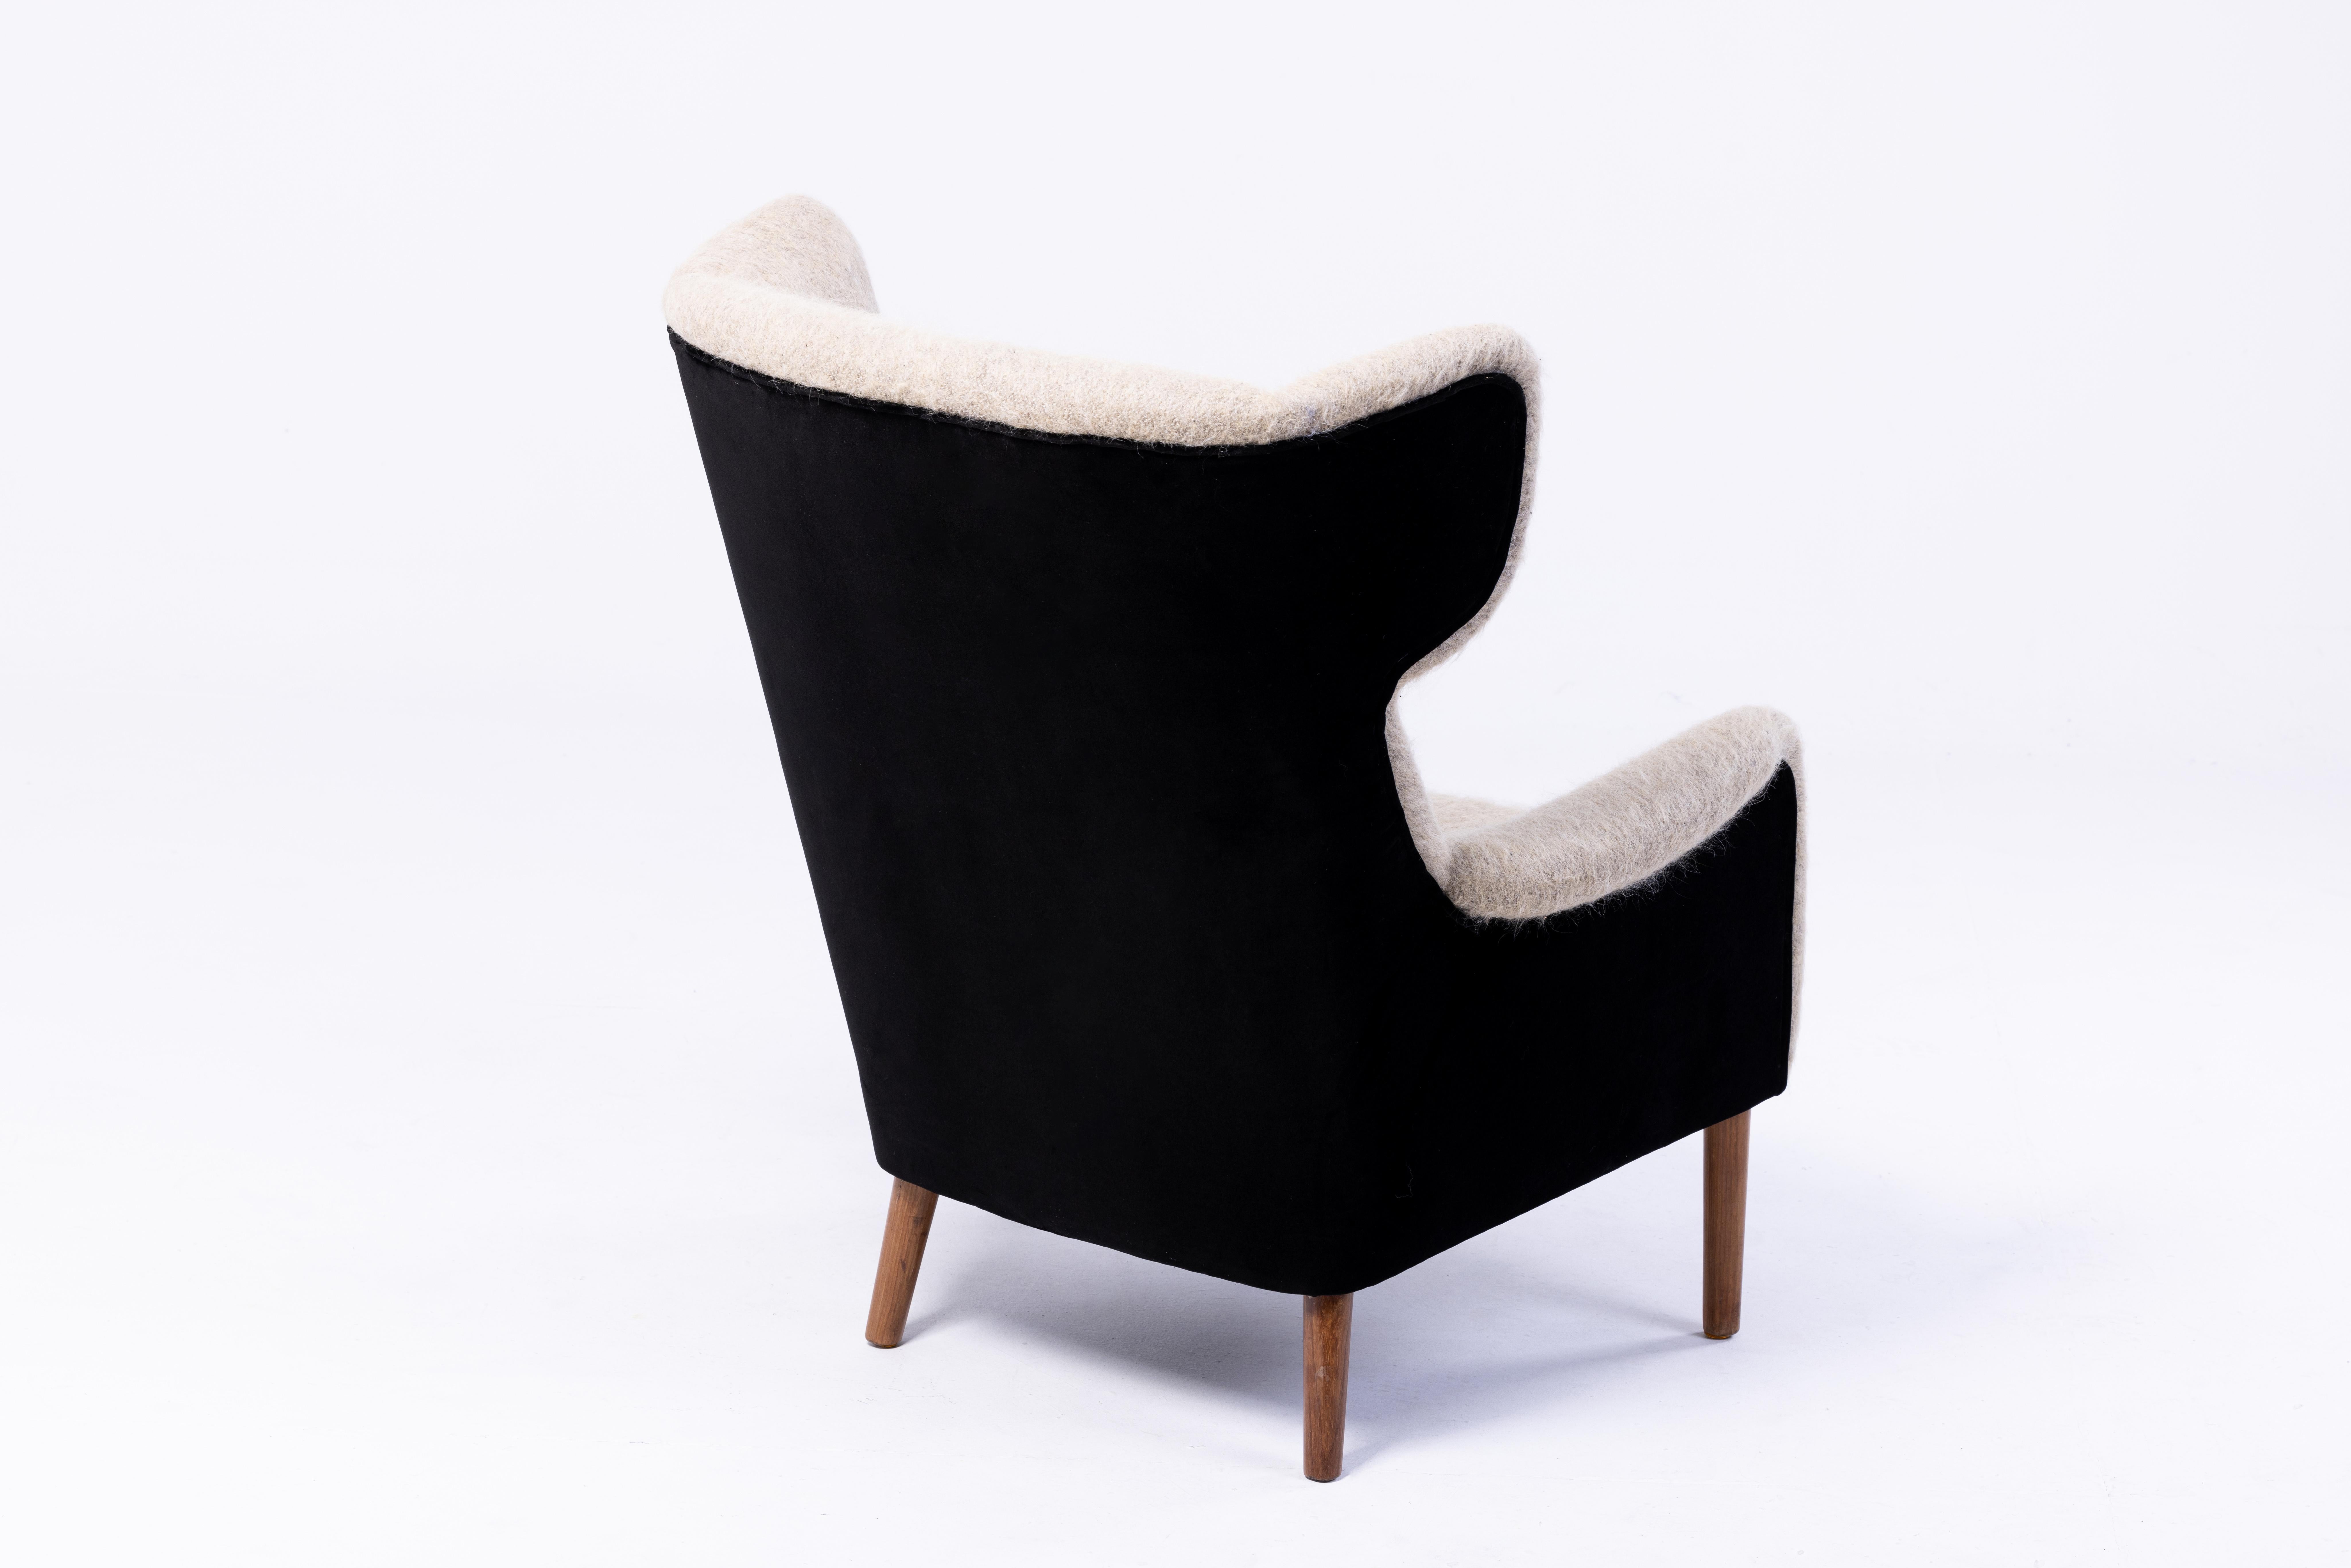 20th Century Danish Wingback Armchair, 1950s, in Hèrmes and Pierre Frey Fabric